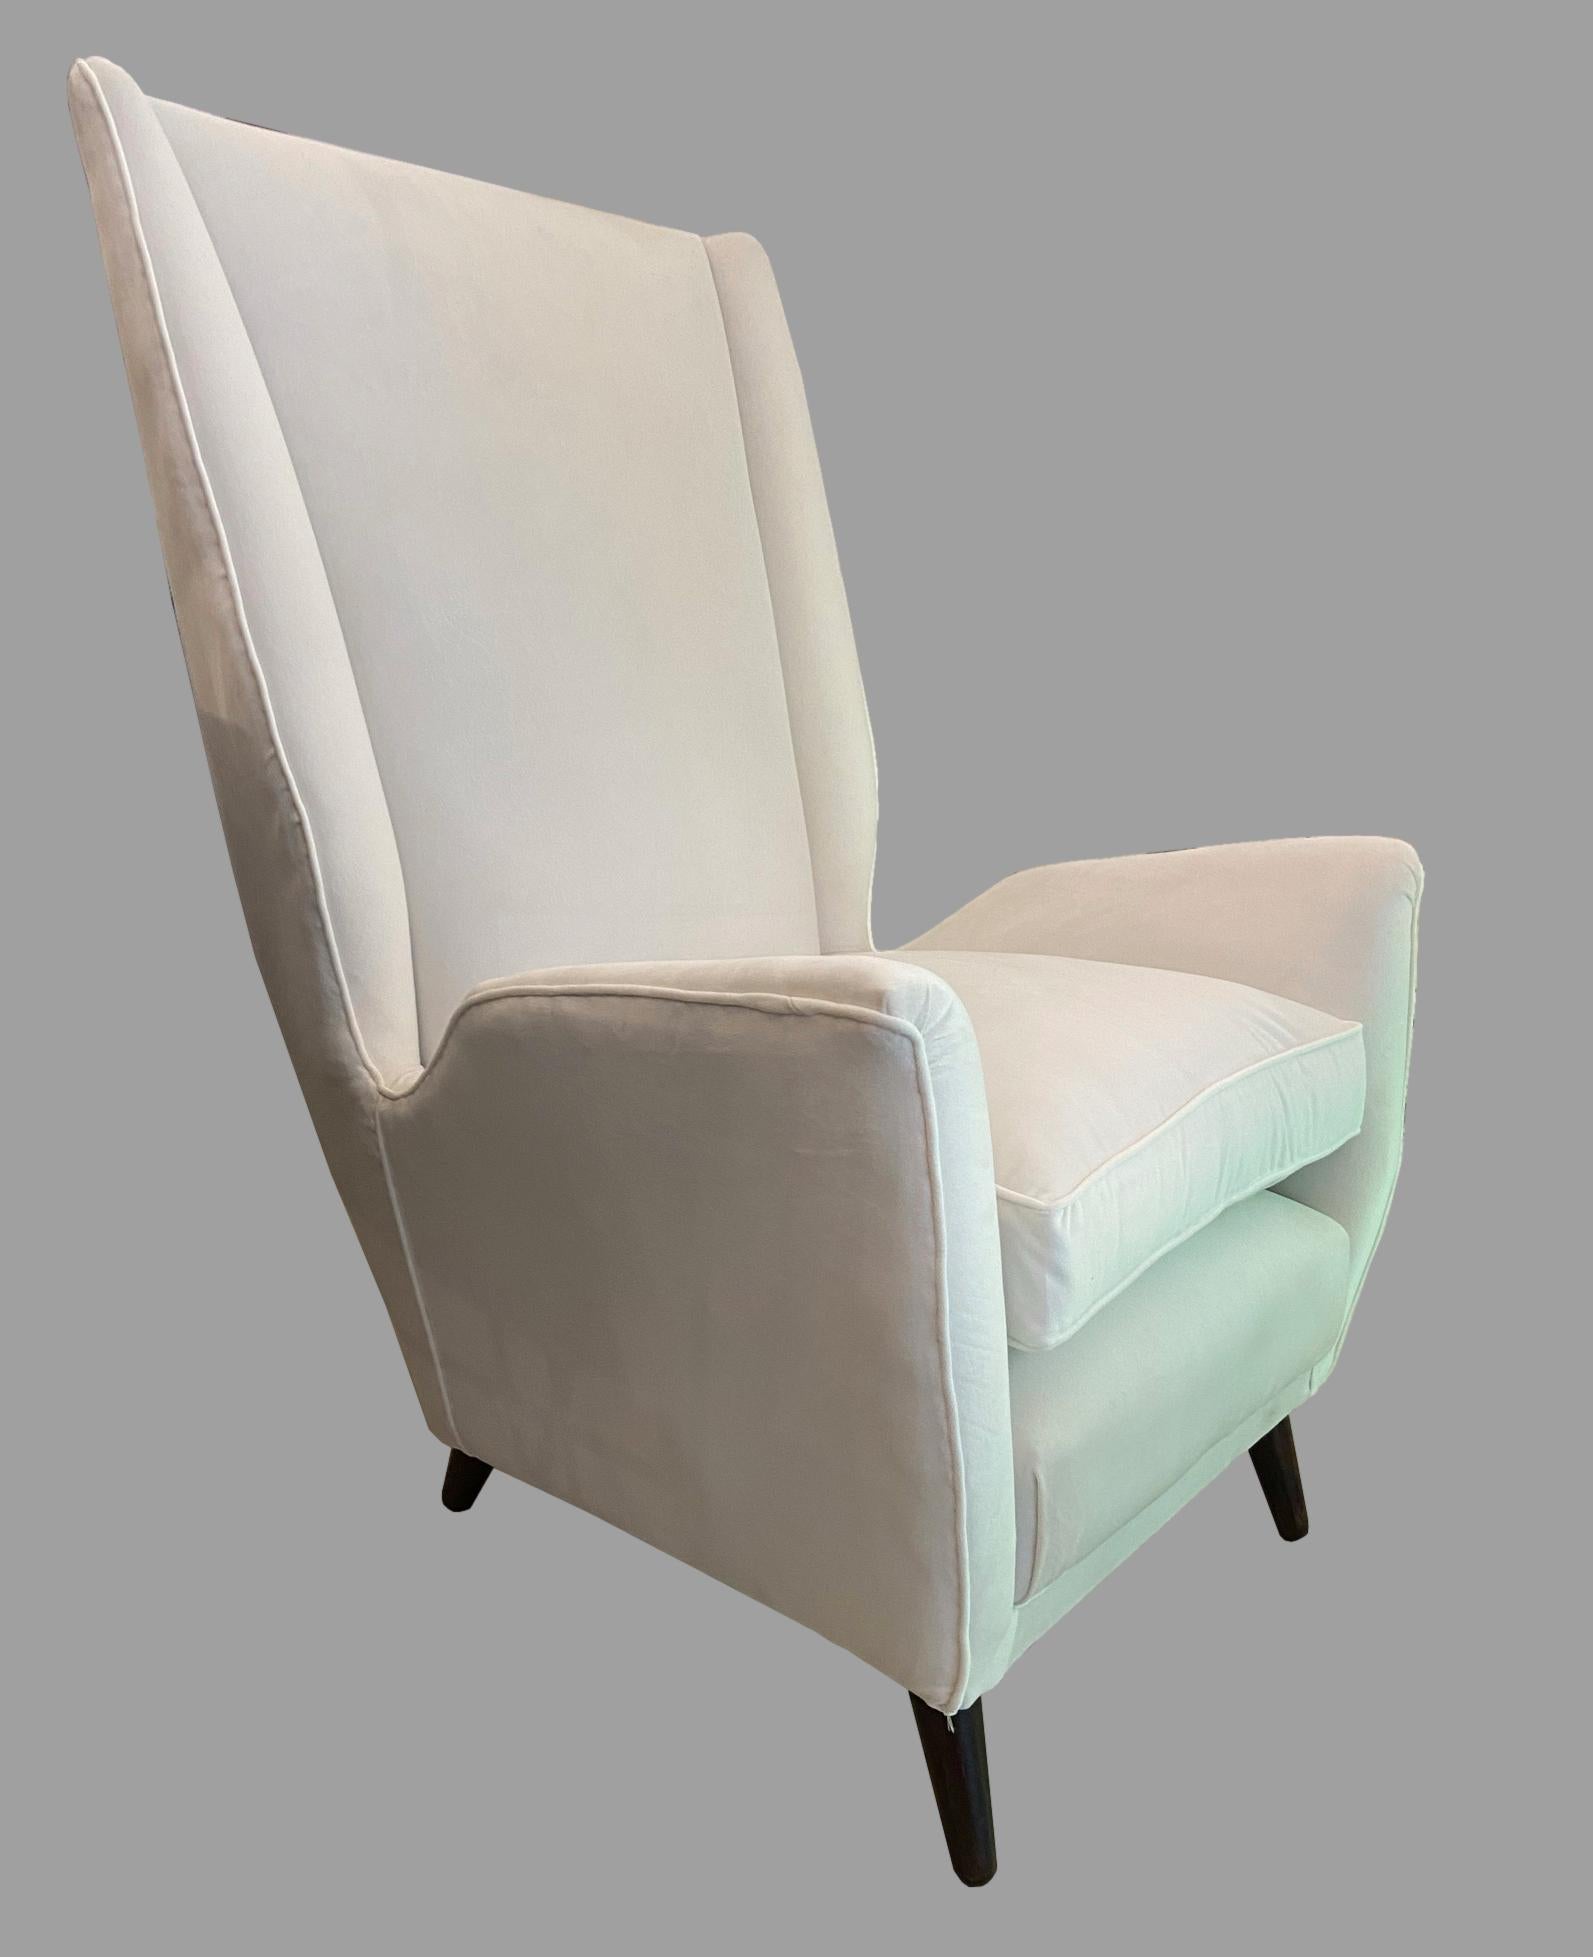 Fabric Gio Ponti for ISA High Back Armchair, Italy, 1950s For Sale